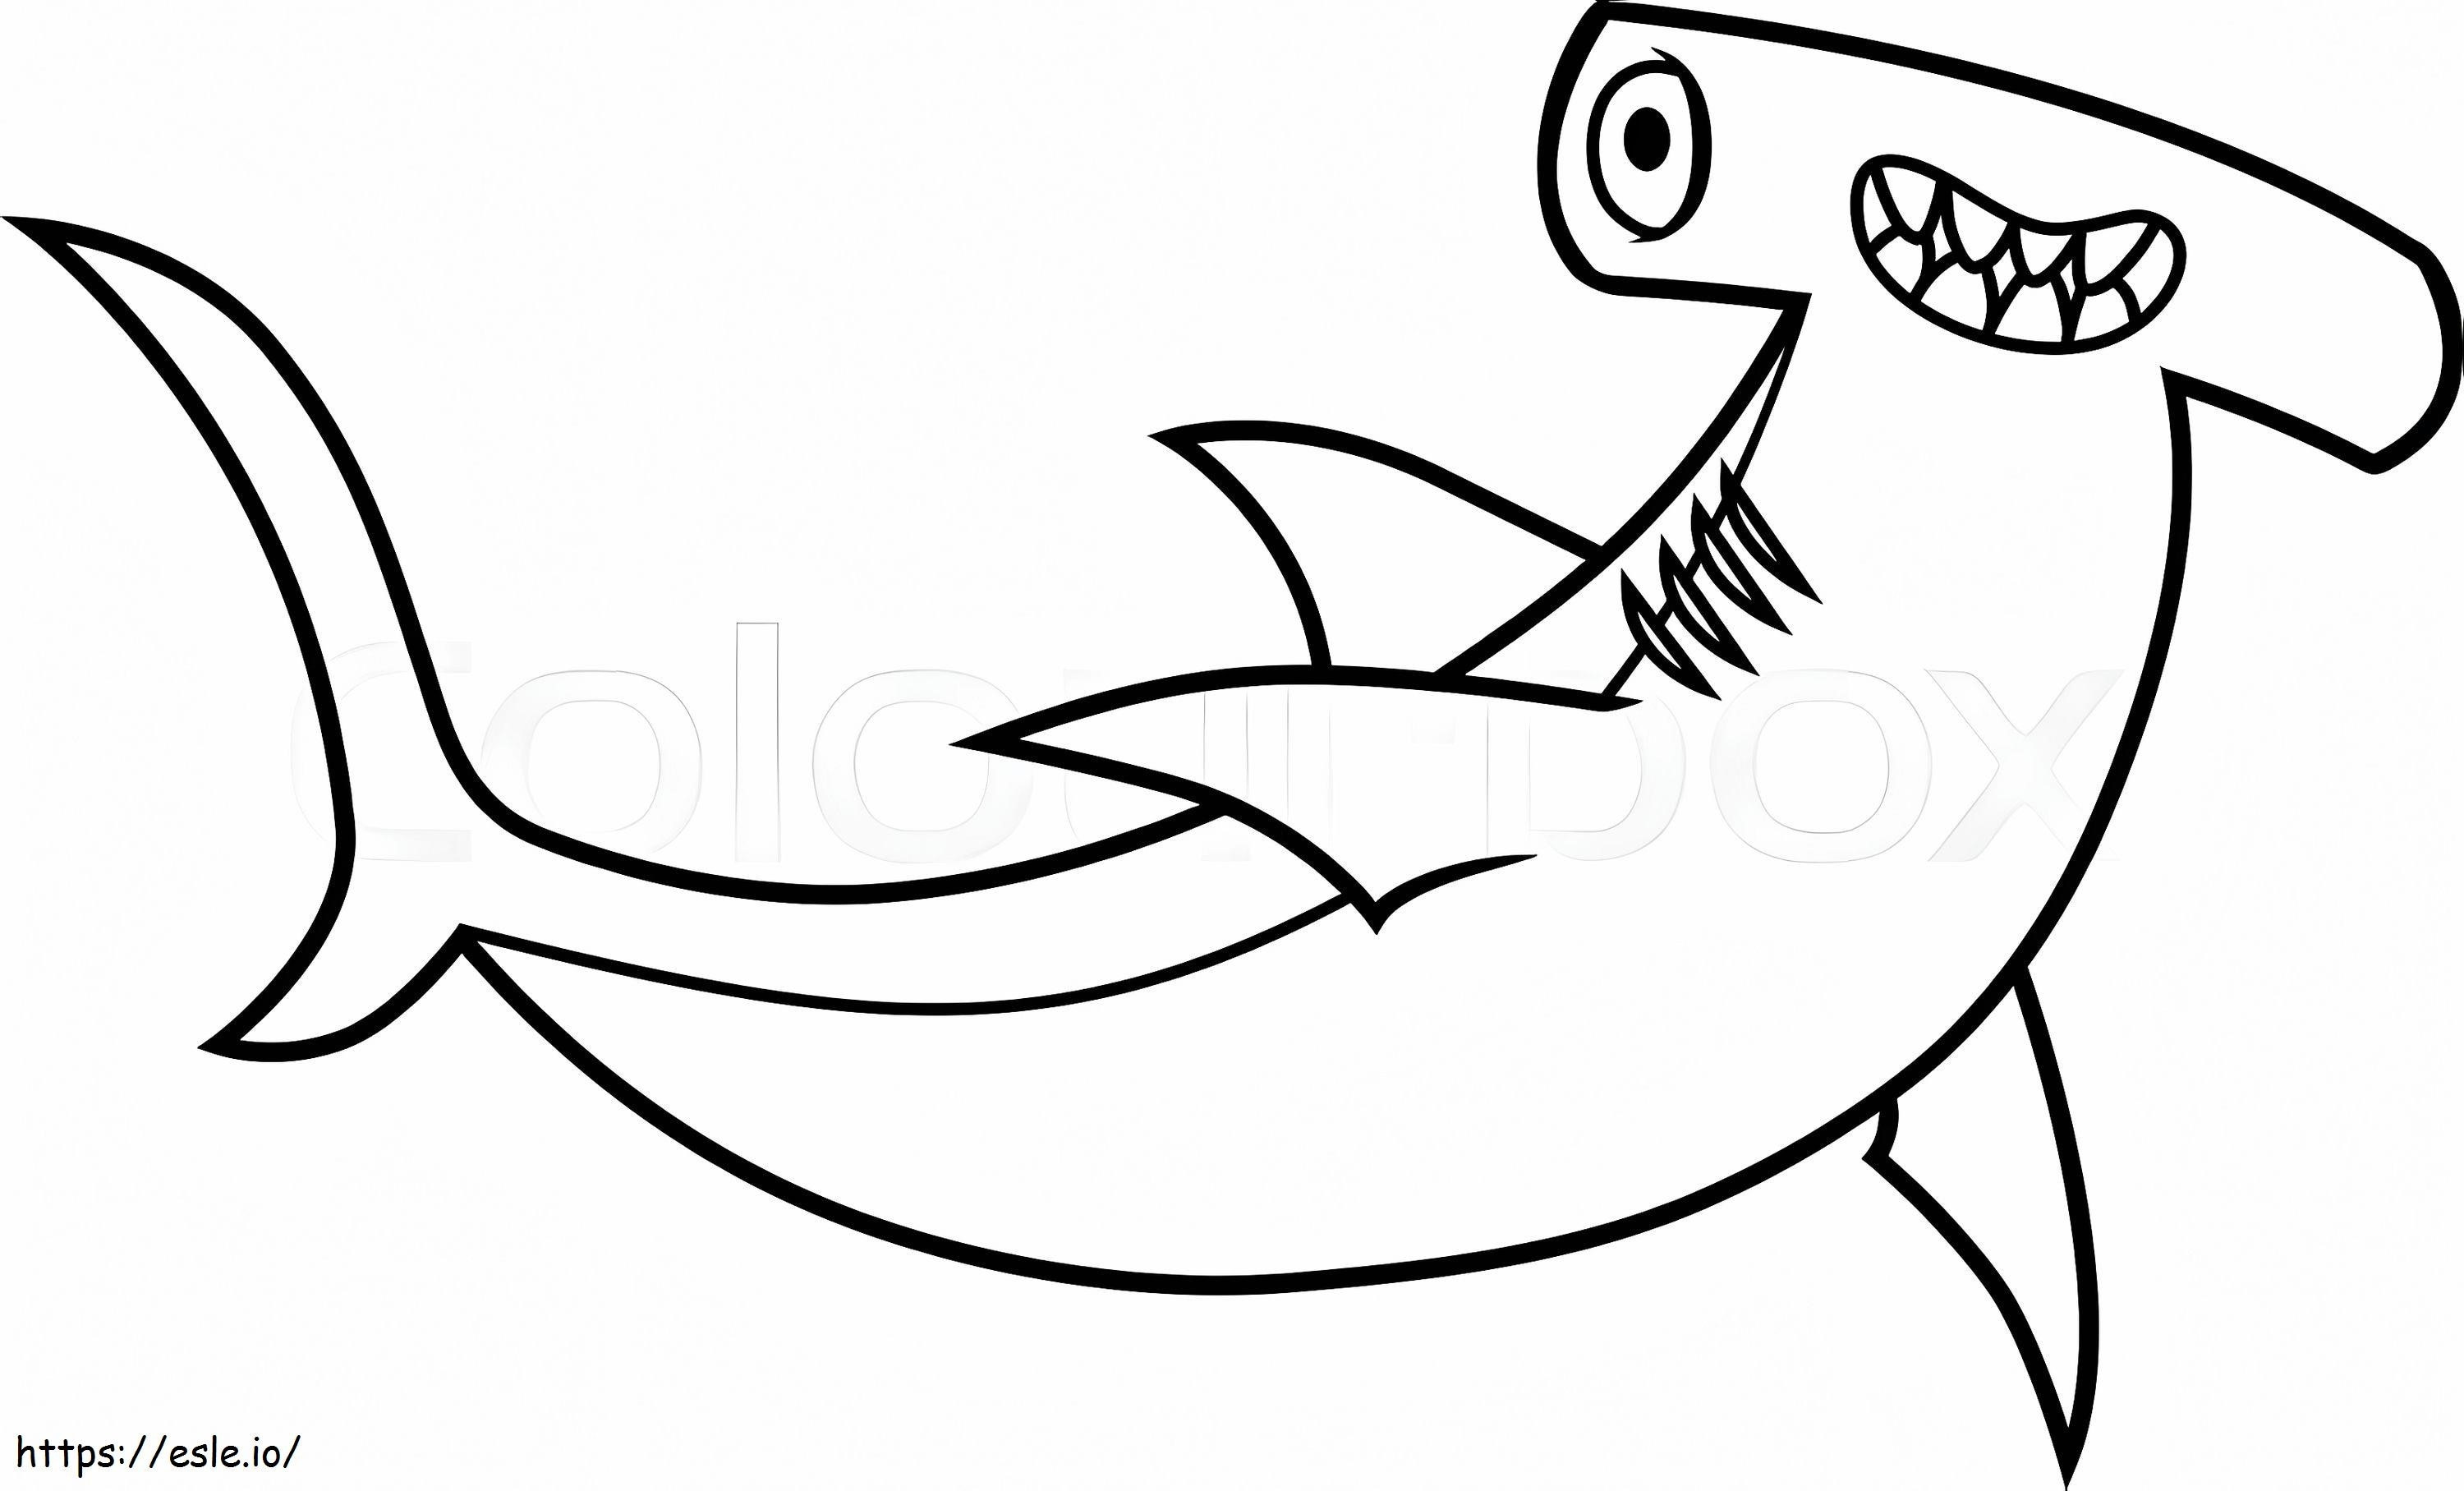 800Px_Colourbox16466611 1 coloring page